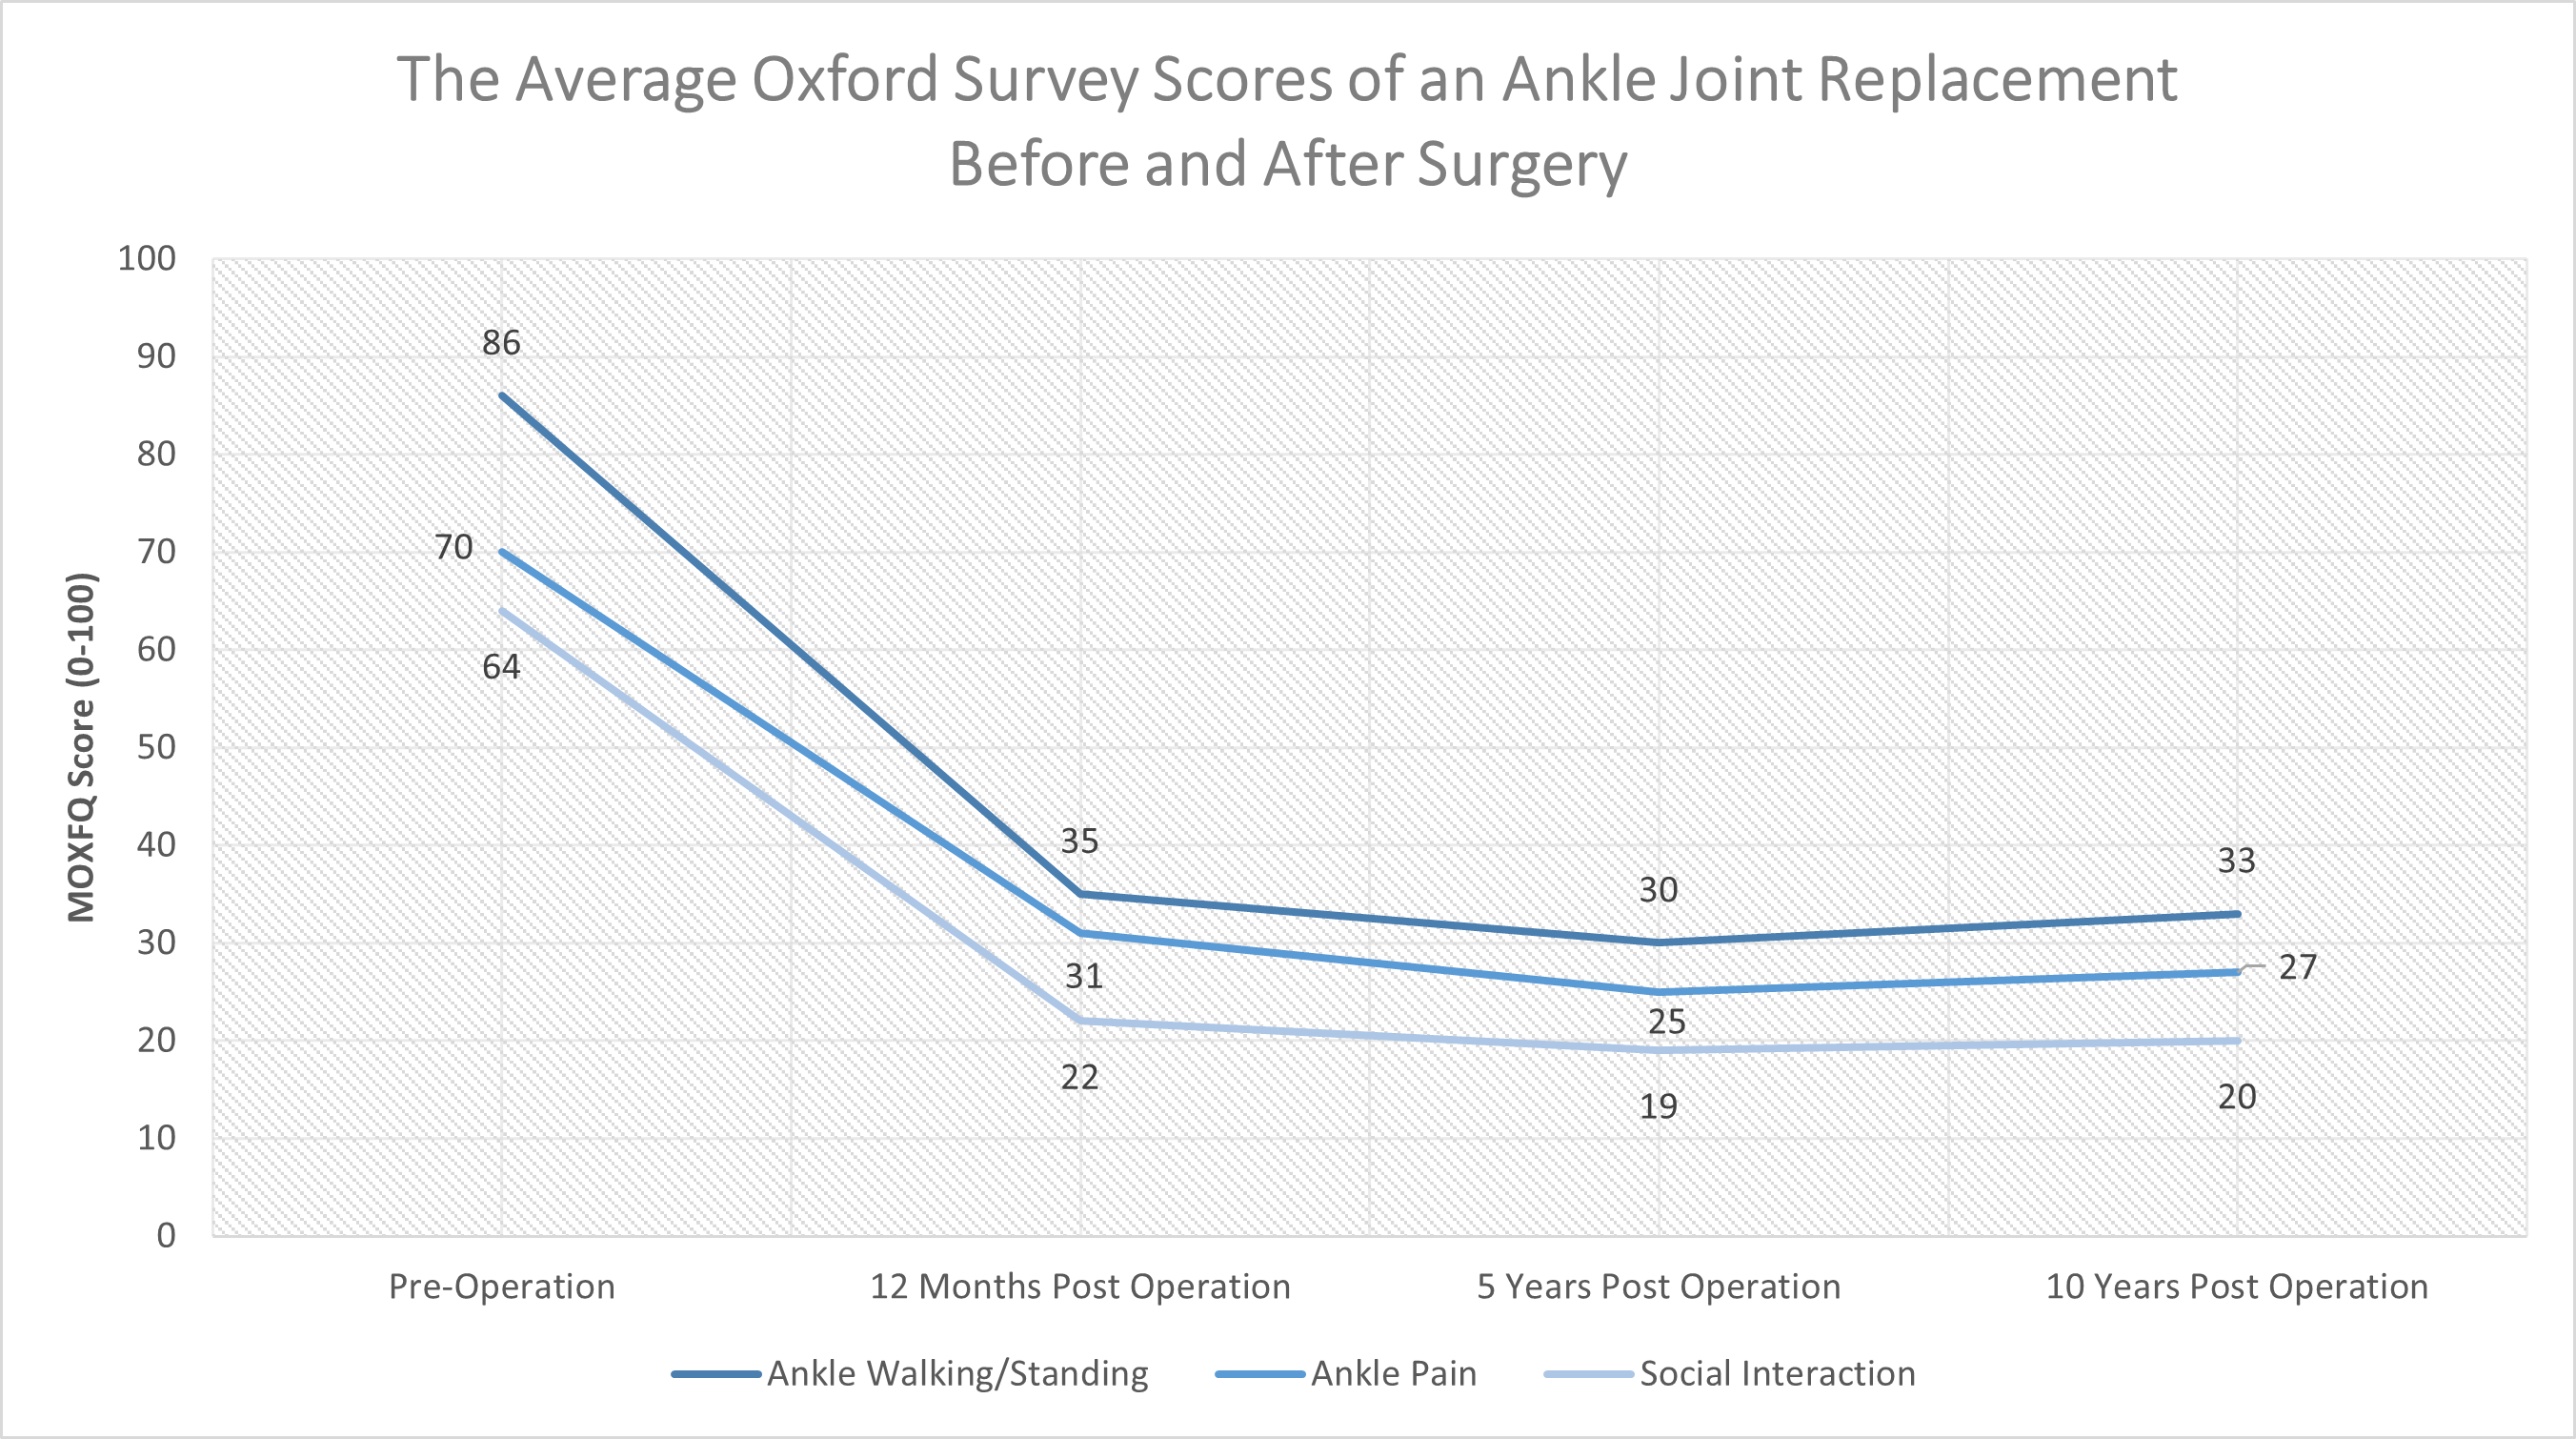 A chart depicting the average Oxford survey score before and after joint replacement surgery in the BOP.